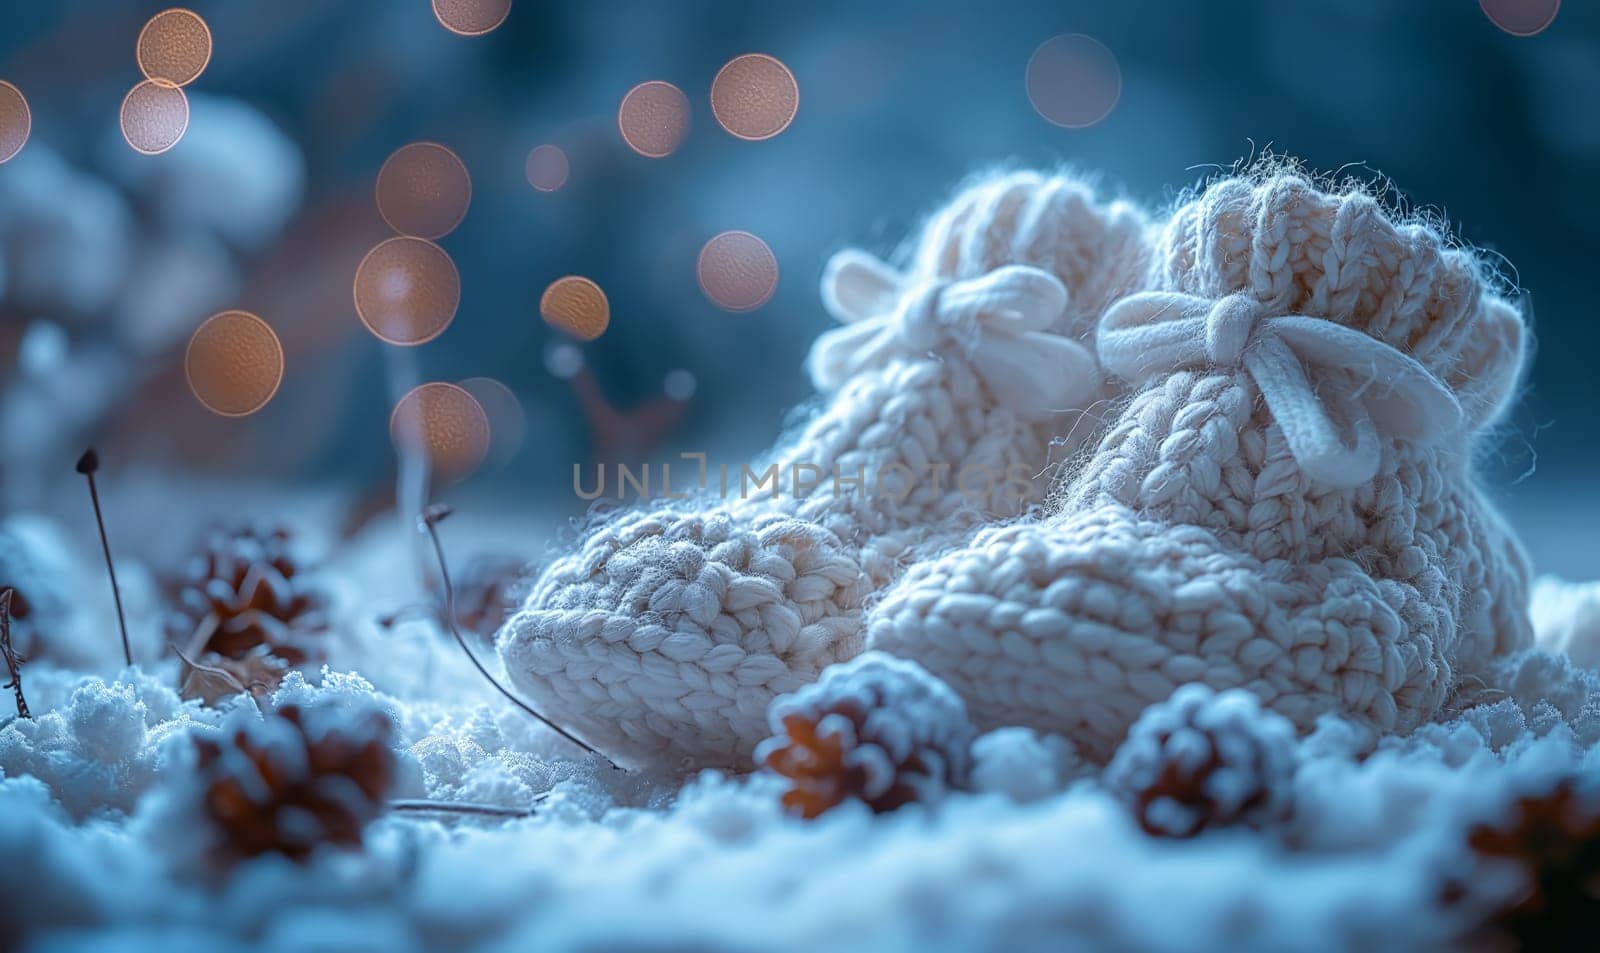 Baby knitted booties on a blurred winter background. by Fischeron